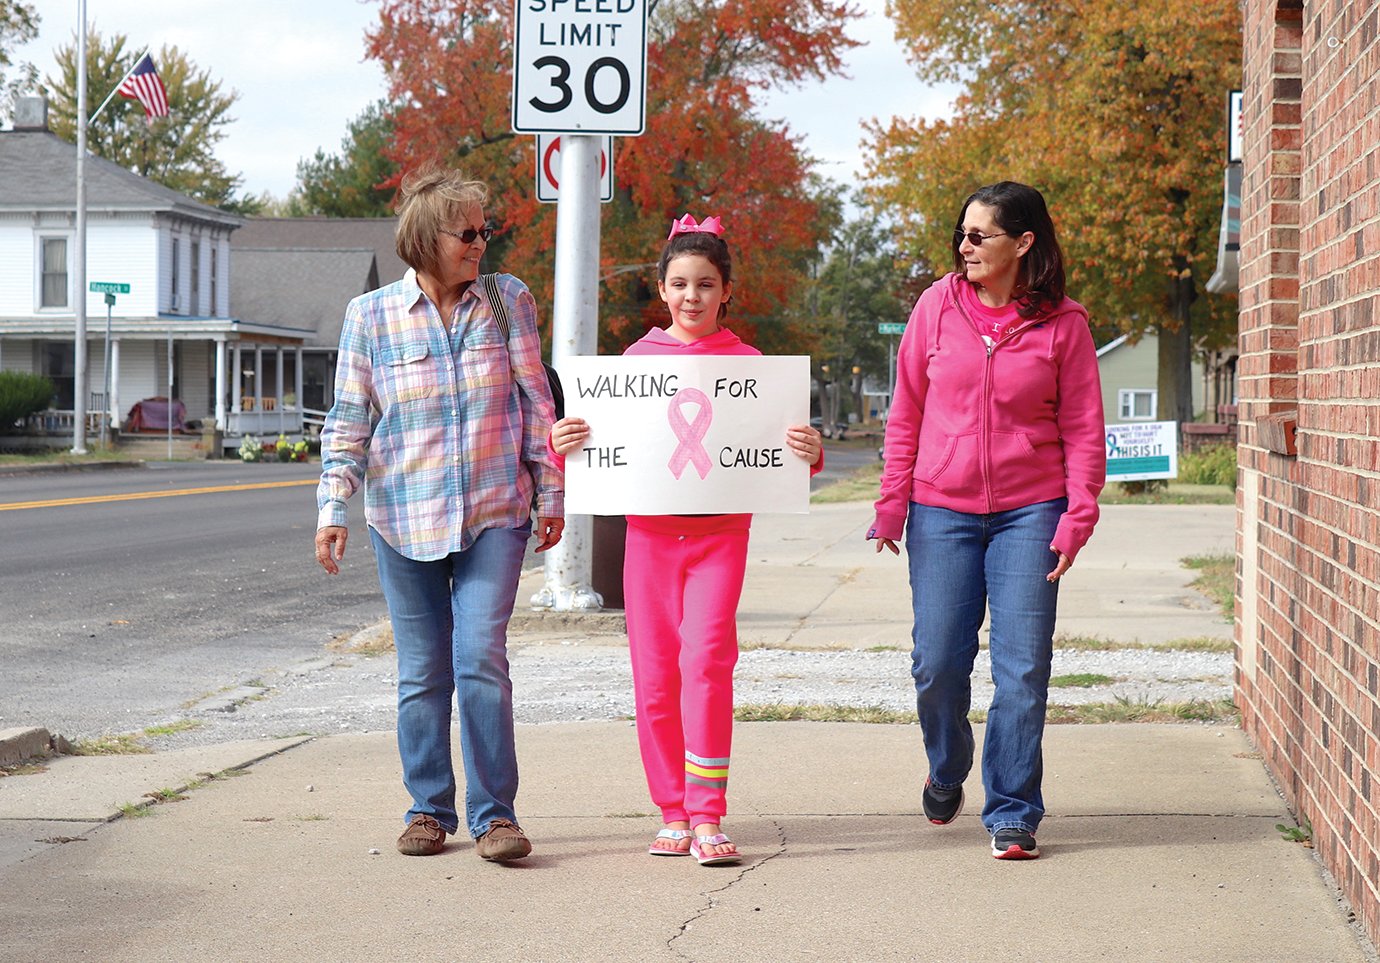 Nancy Gregg, from left, 11-year-old Brylee Dinius and grandmother Christa Dinius create a Breast Cancer Walk of their own along Washington Street in Waynetown. The group's impromtu decision follows the cancelation of the walk of the same name in Indianapolis each October, thwarted this year by the coronavirus (COVID-19).